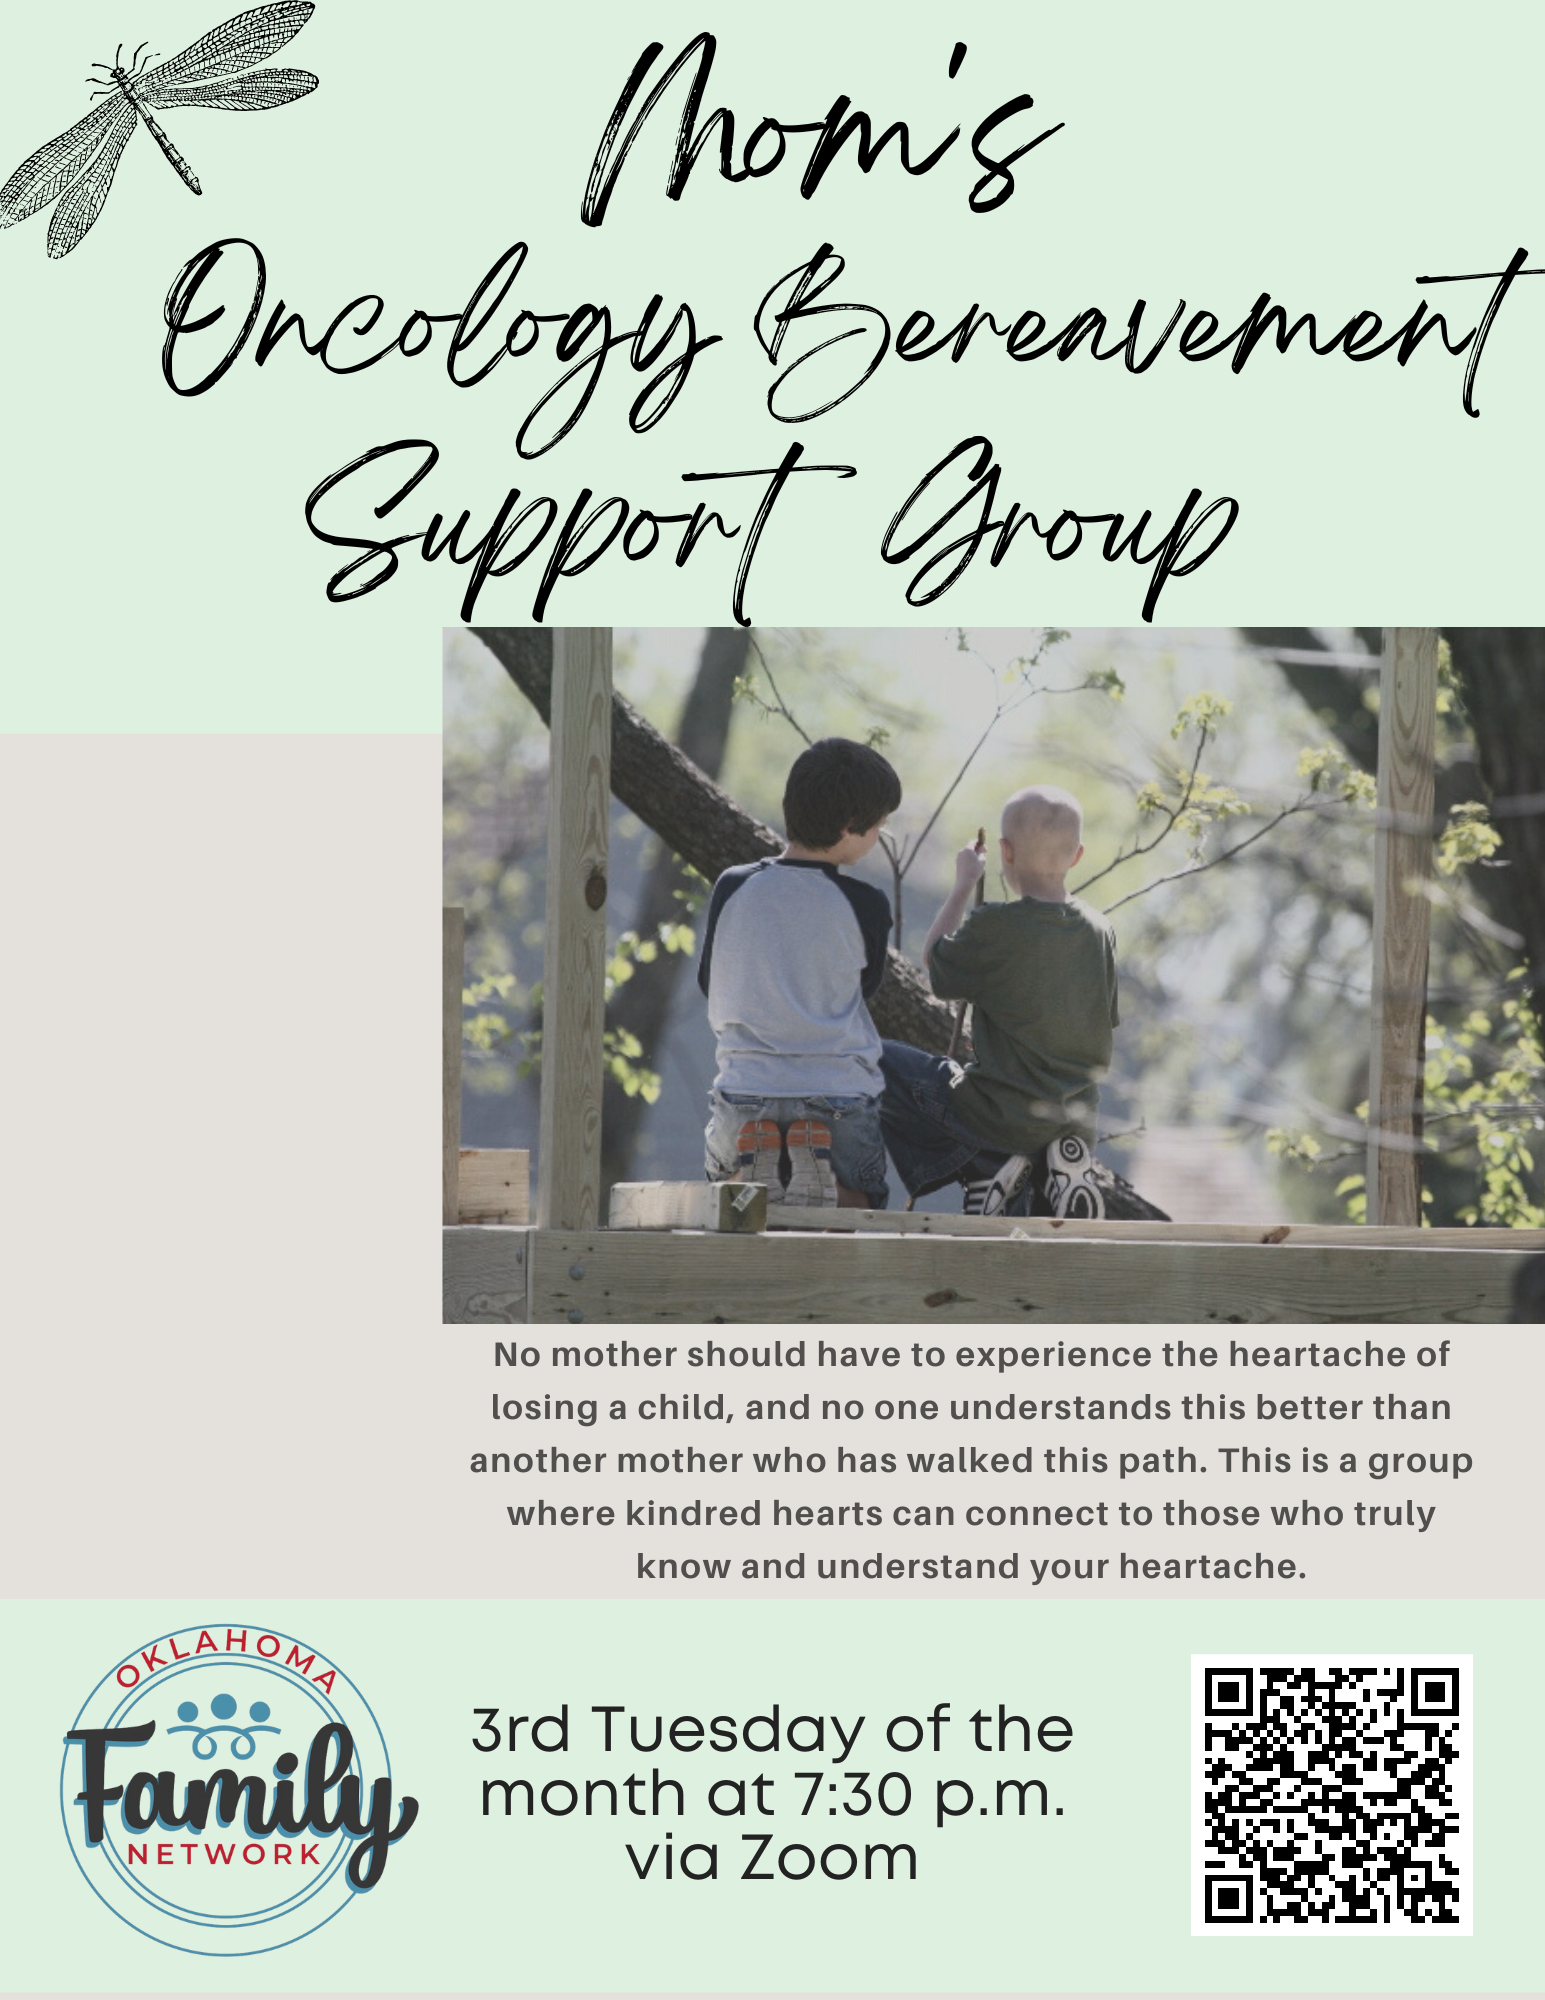 Mom's oncology bereavement support group meets the 3rd Tuesday of the month at 7:30 p.m. via Zoom